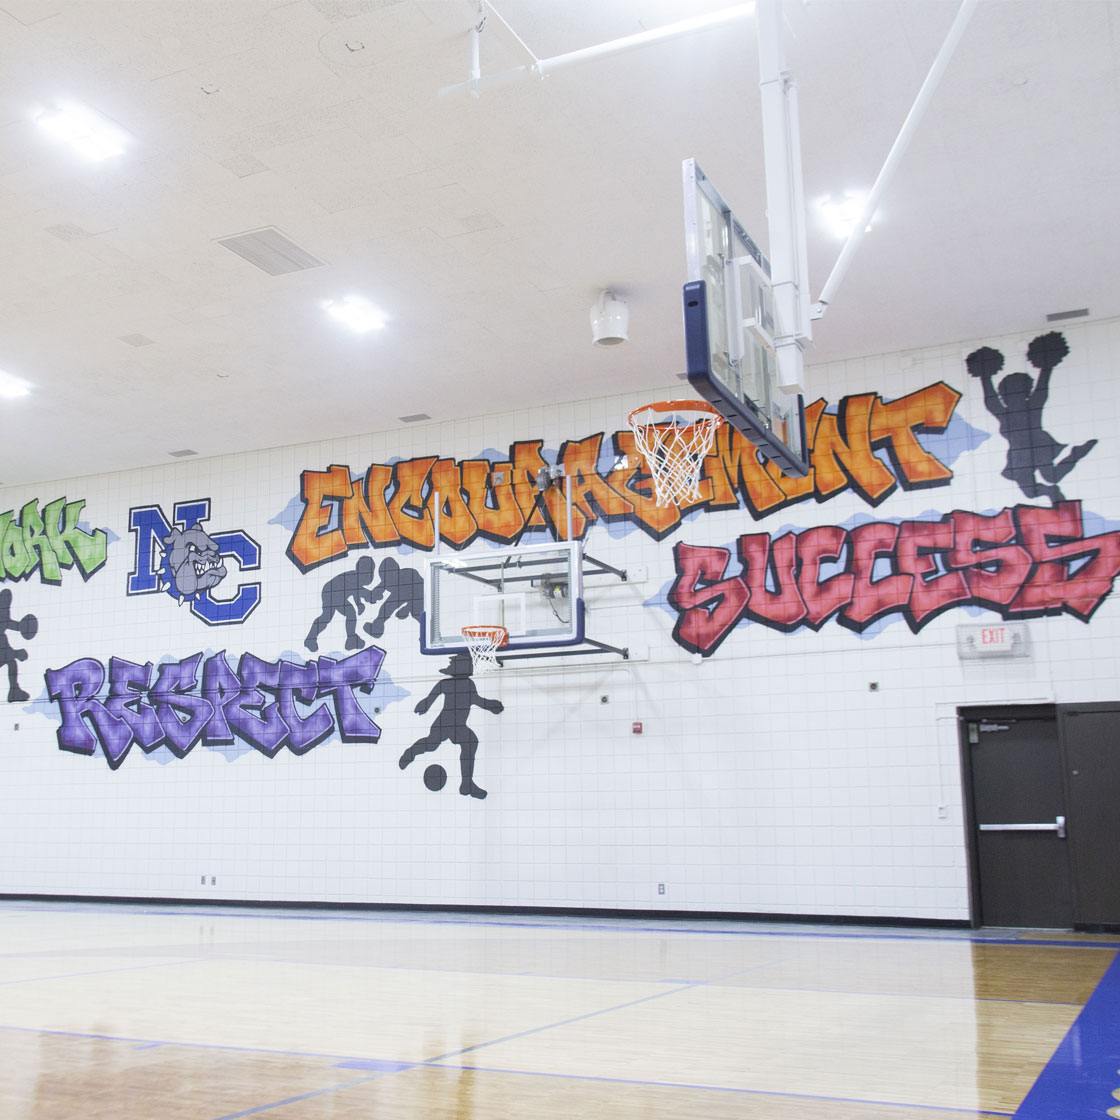 A gymnasium basketball court with a painted wall mural with the words Attitude, Hard Work, Respect, Encouragement, Success